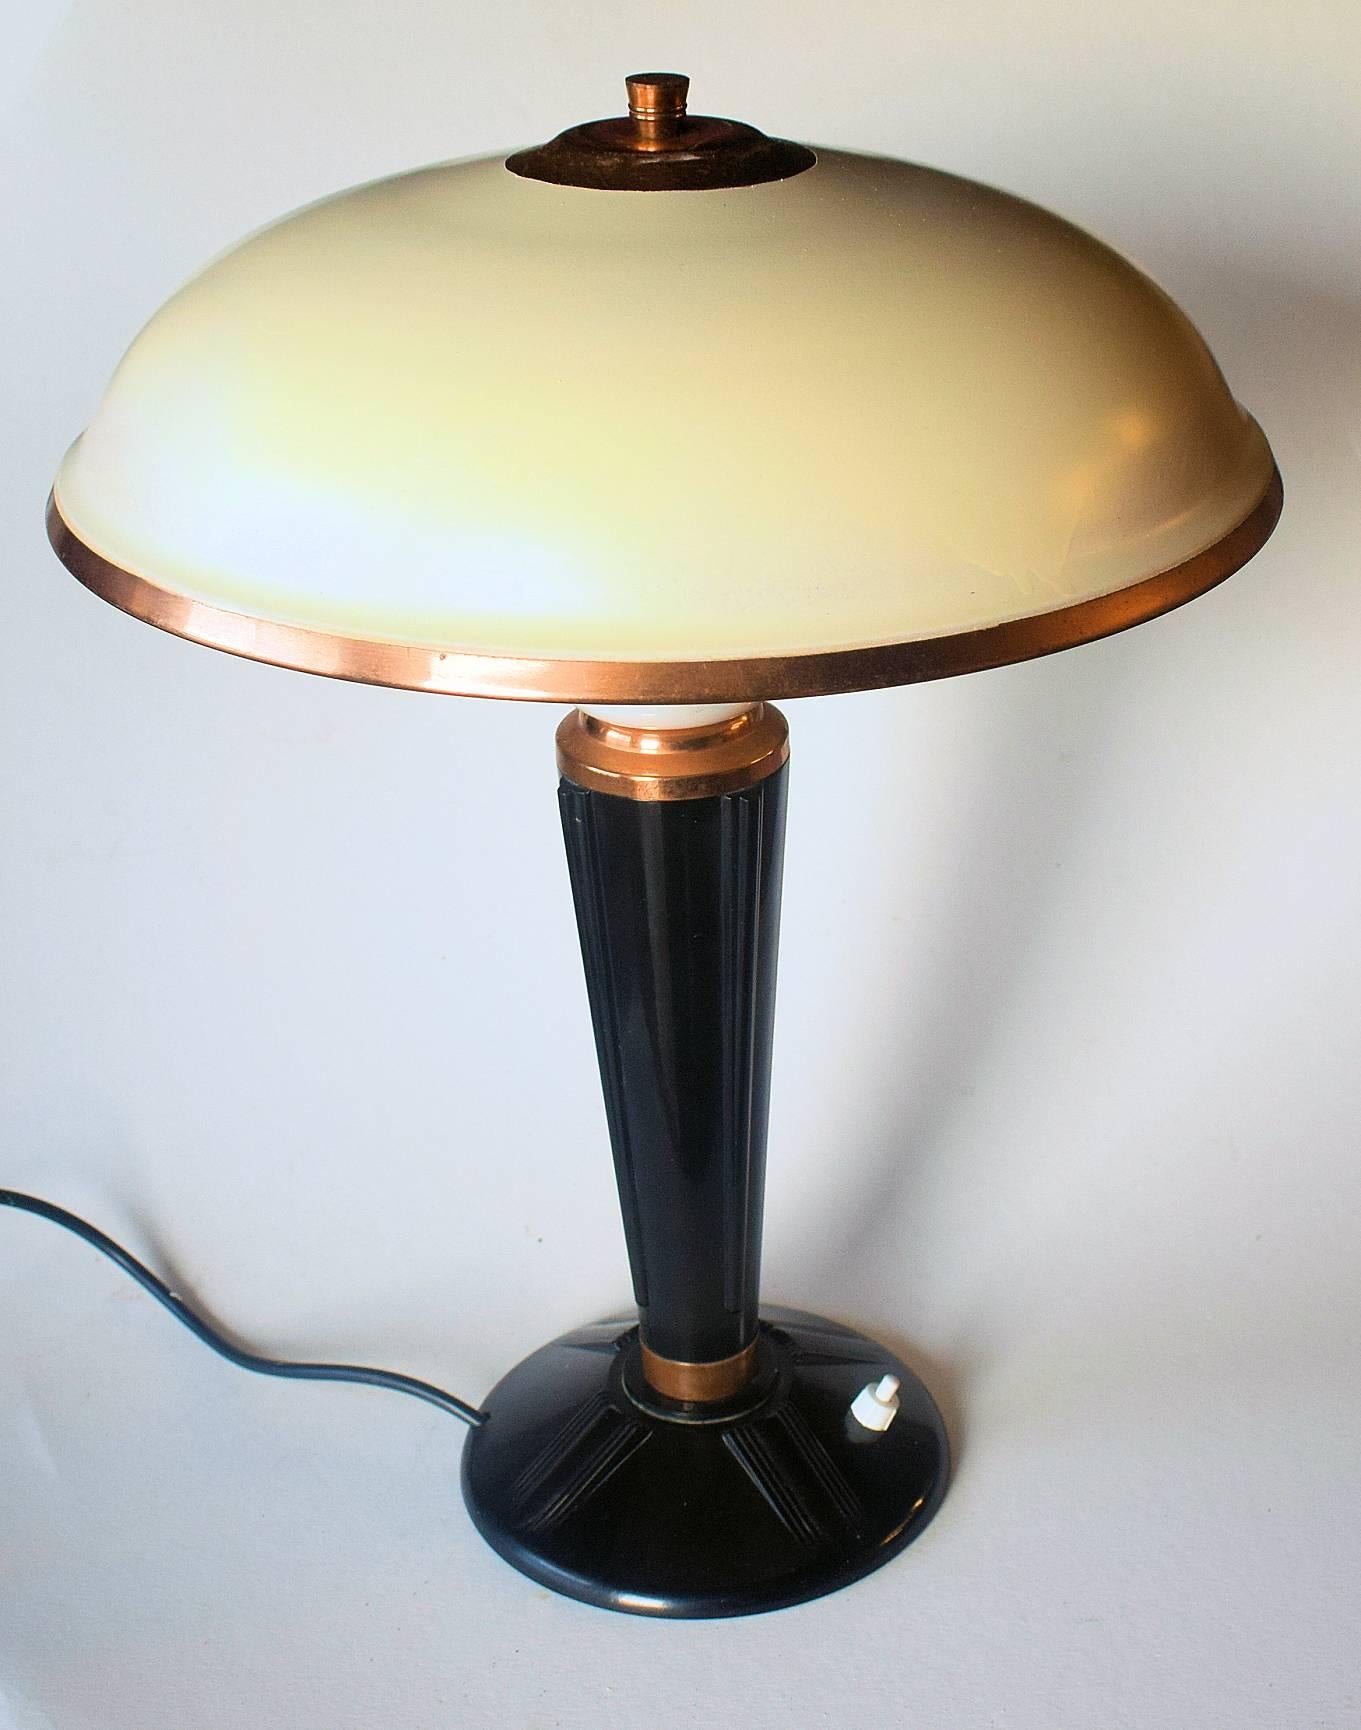 Designed by Eileen Gray for the French Jumo company and dating to the 1930s-1940s this very stylish lamp is made from two primary components which are bakelite and metal. Superb mushroom shape enameled metal shade with copper accents and finial.